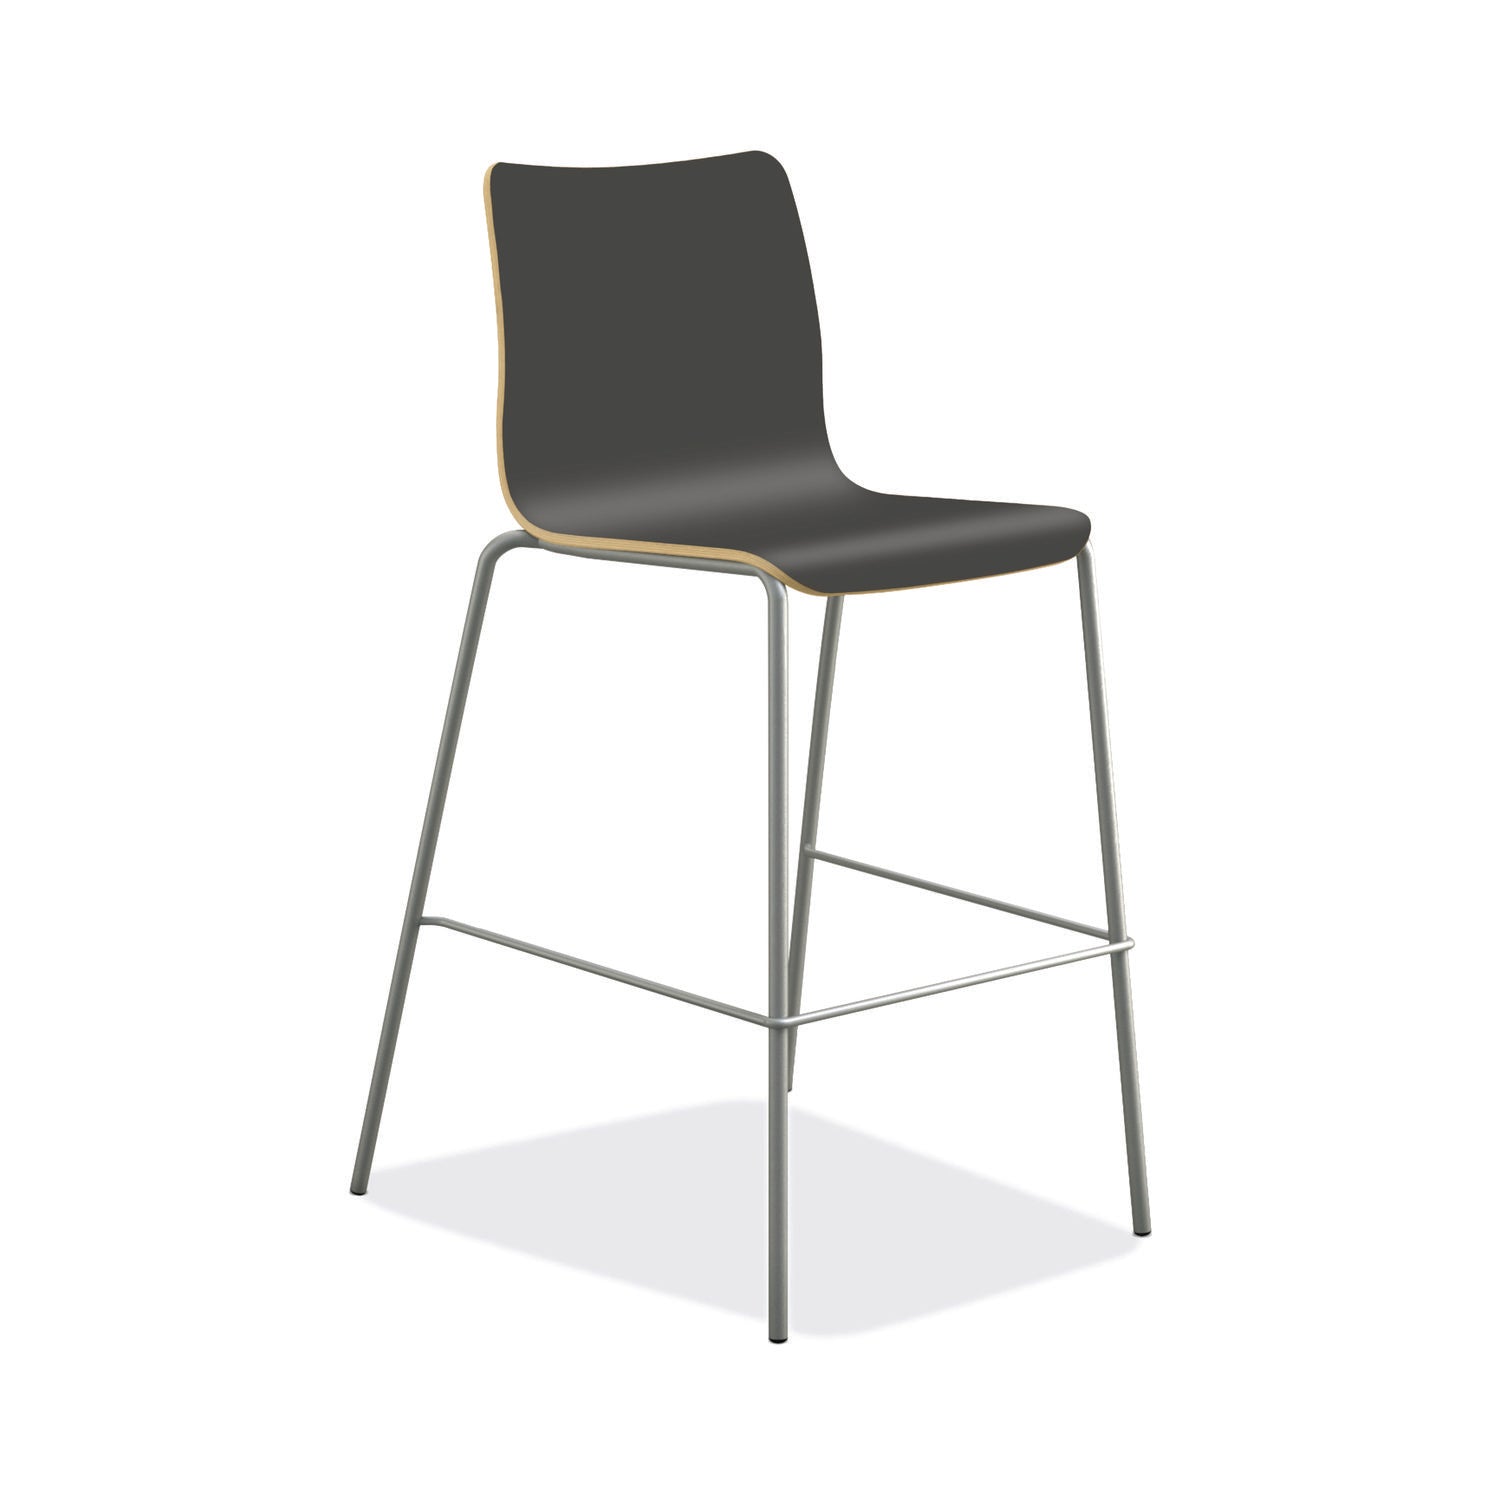 ruck-laminate-stool-up-to-300-lbs-30-seat-height-charcoal-seat-charcoal-back-silver-base_honruck5lsp8 - 1